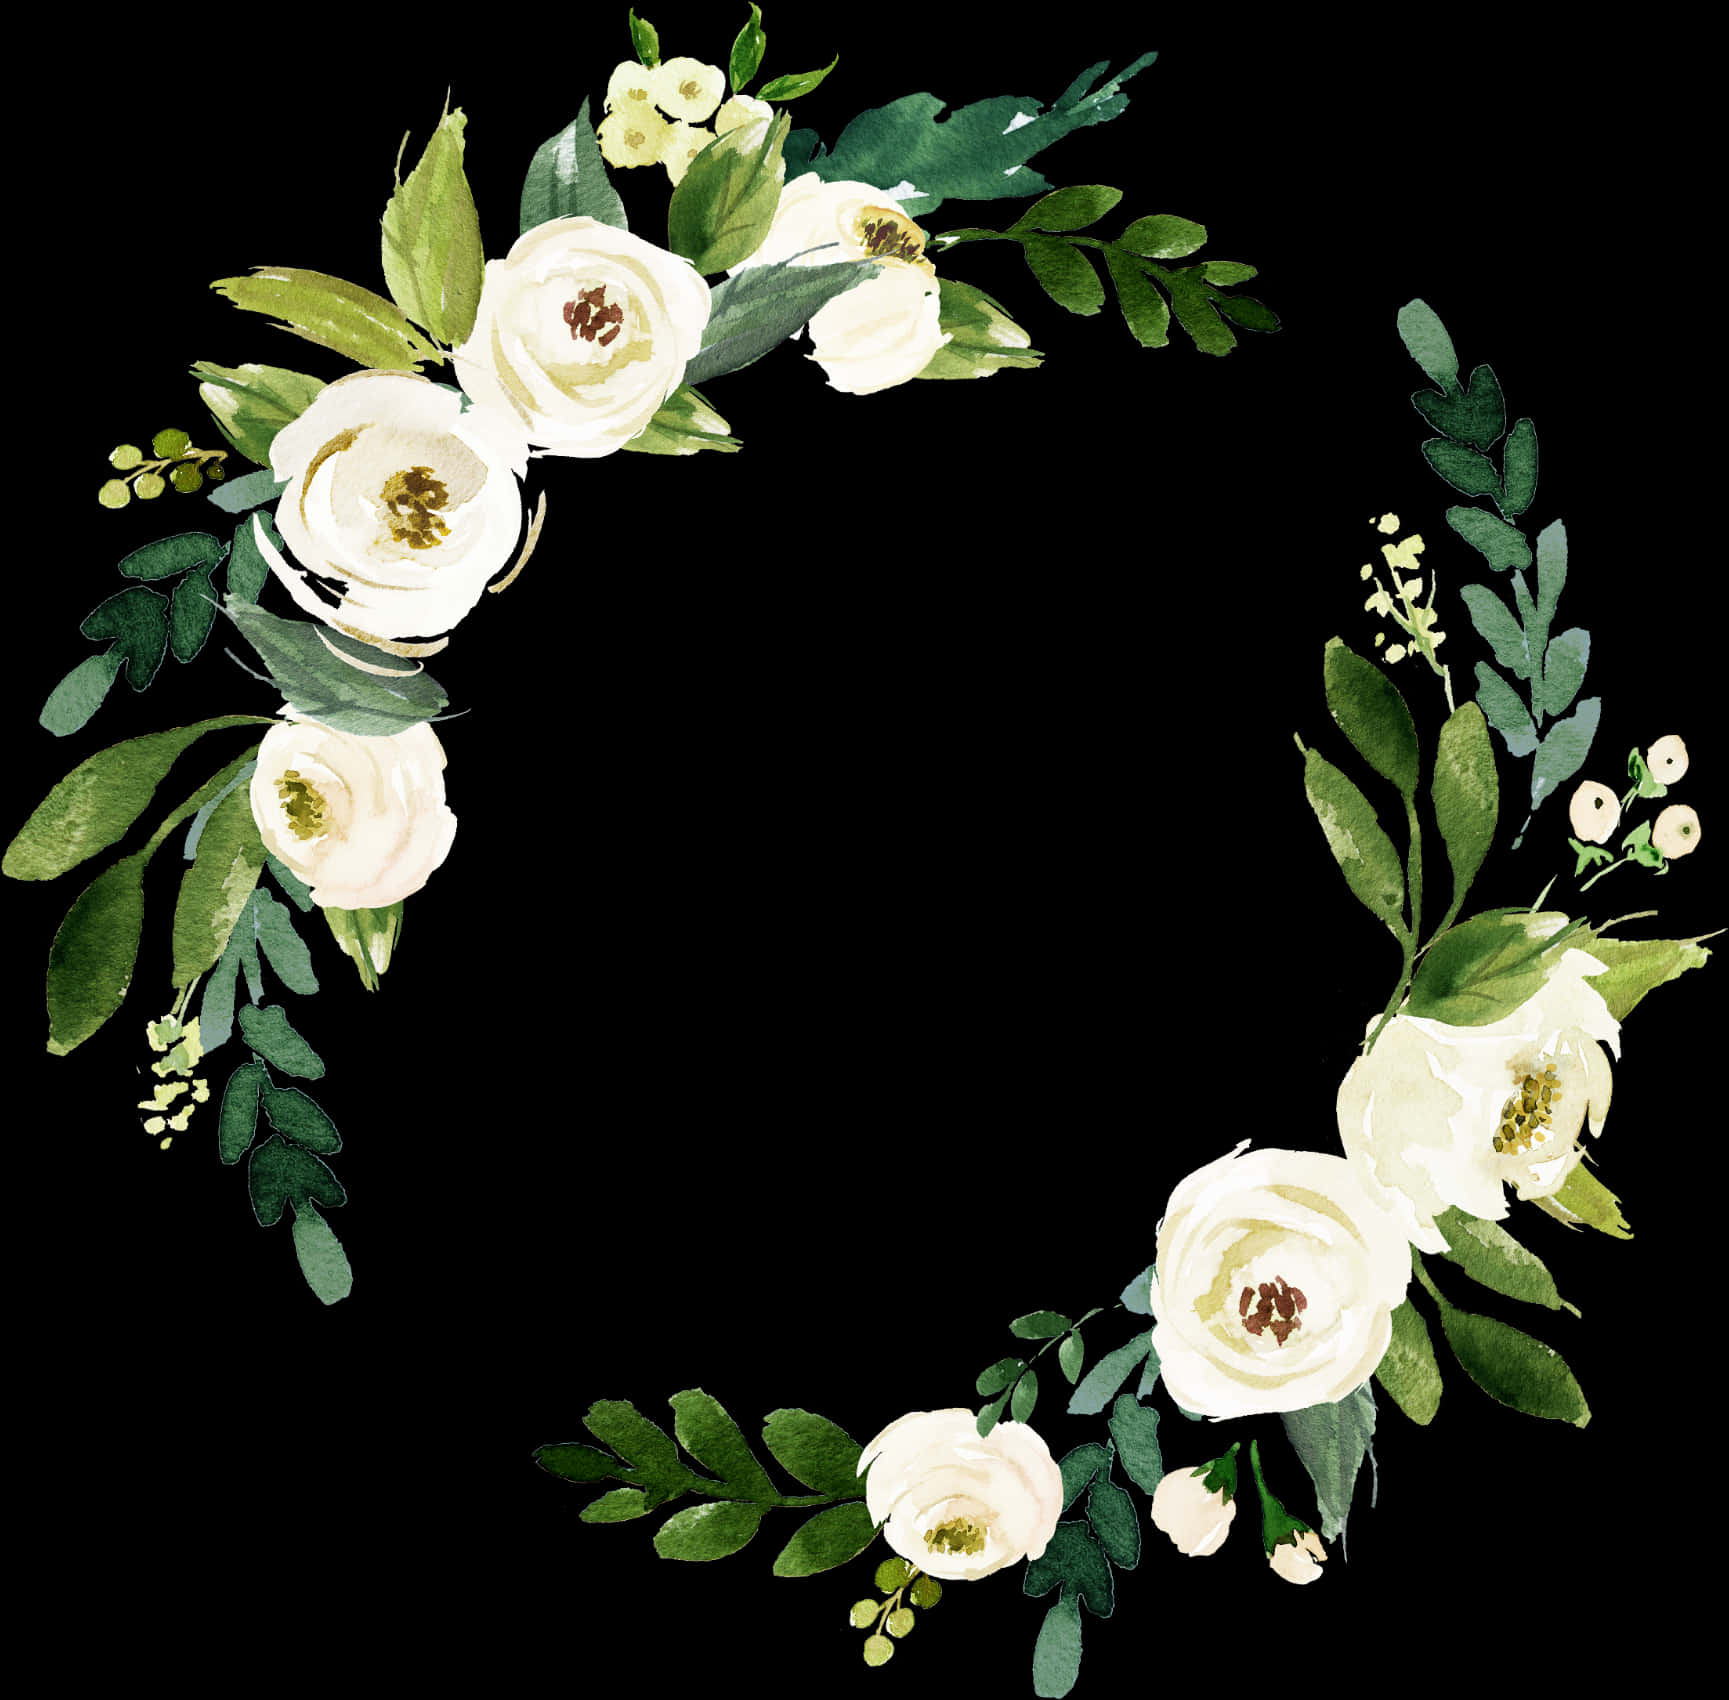 A Wreath Of White Flowers And Green Leaves